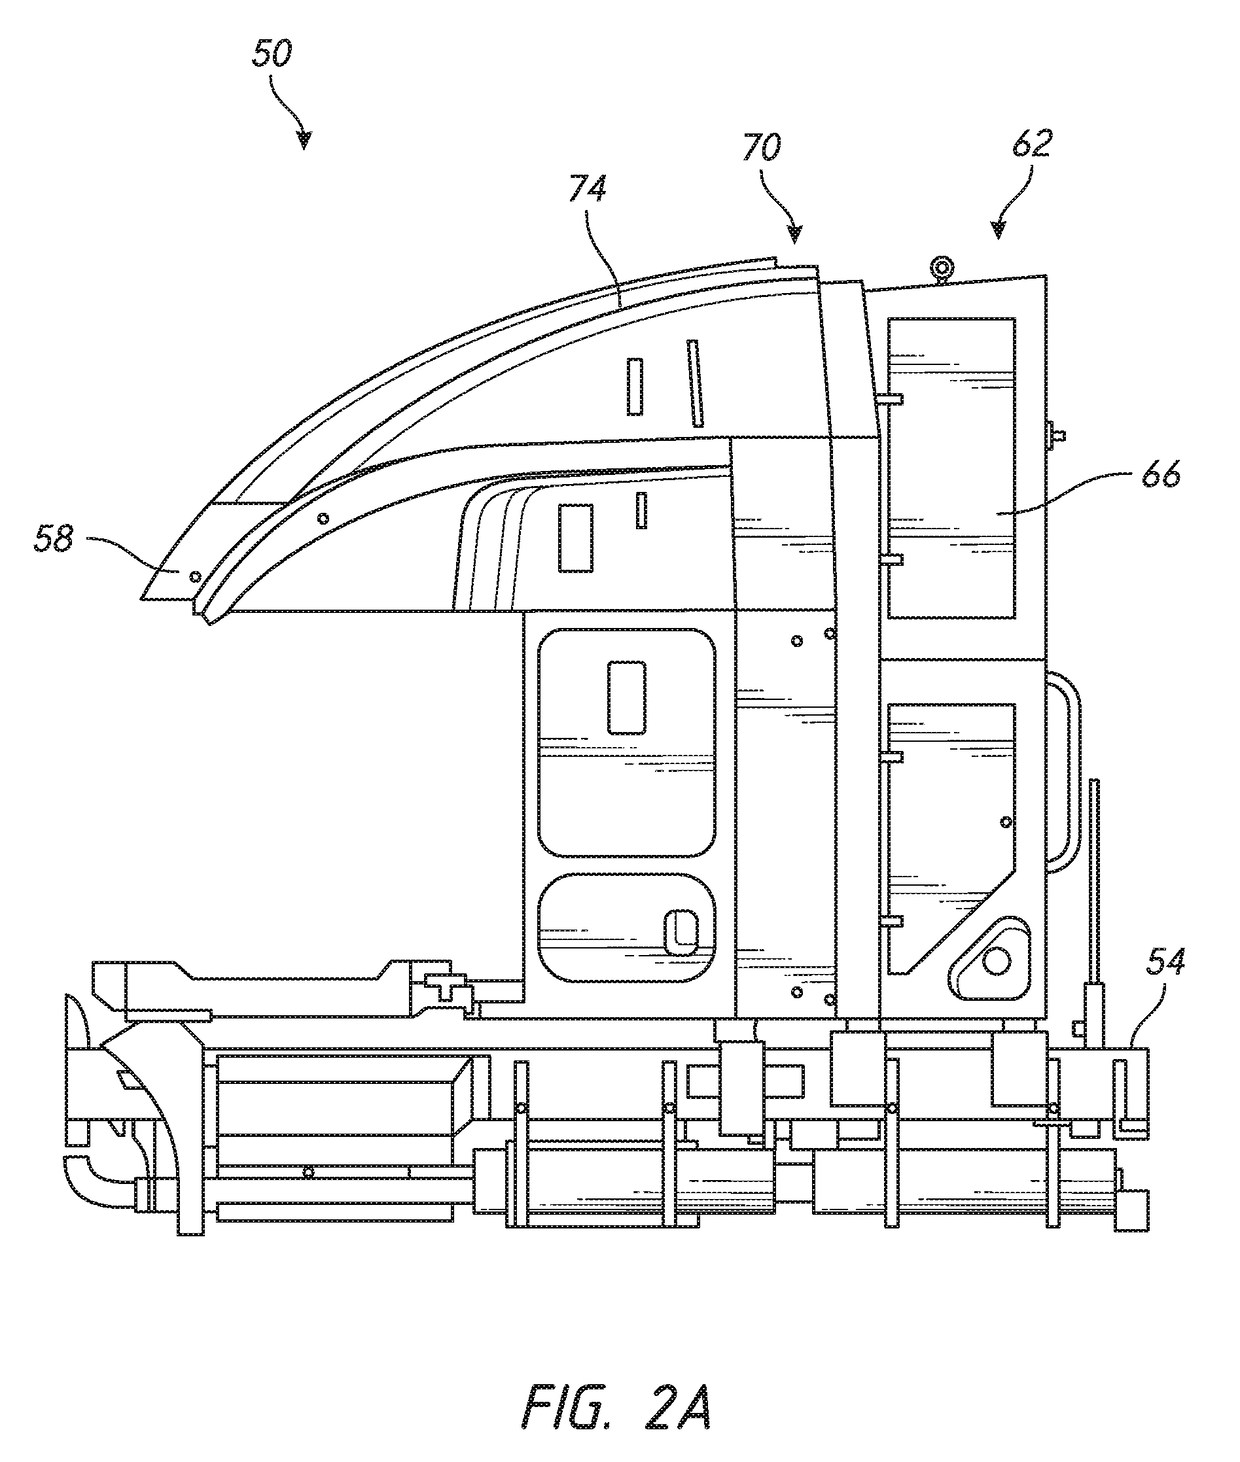 Back-of-cab fuel system and vehicle assemblies